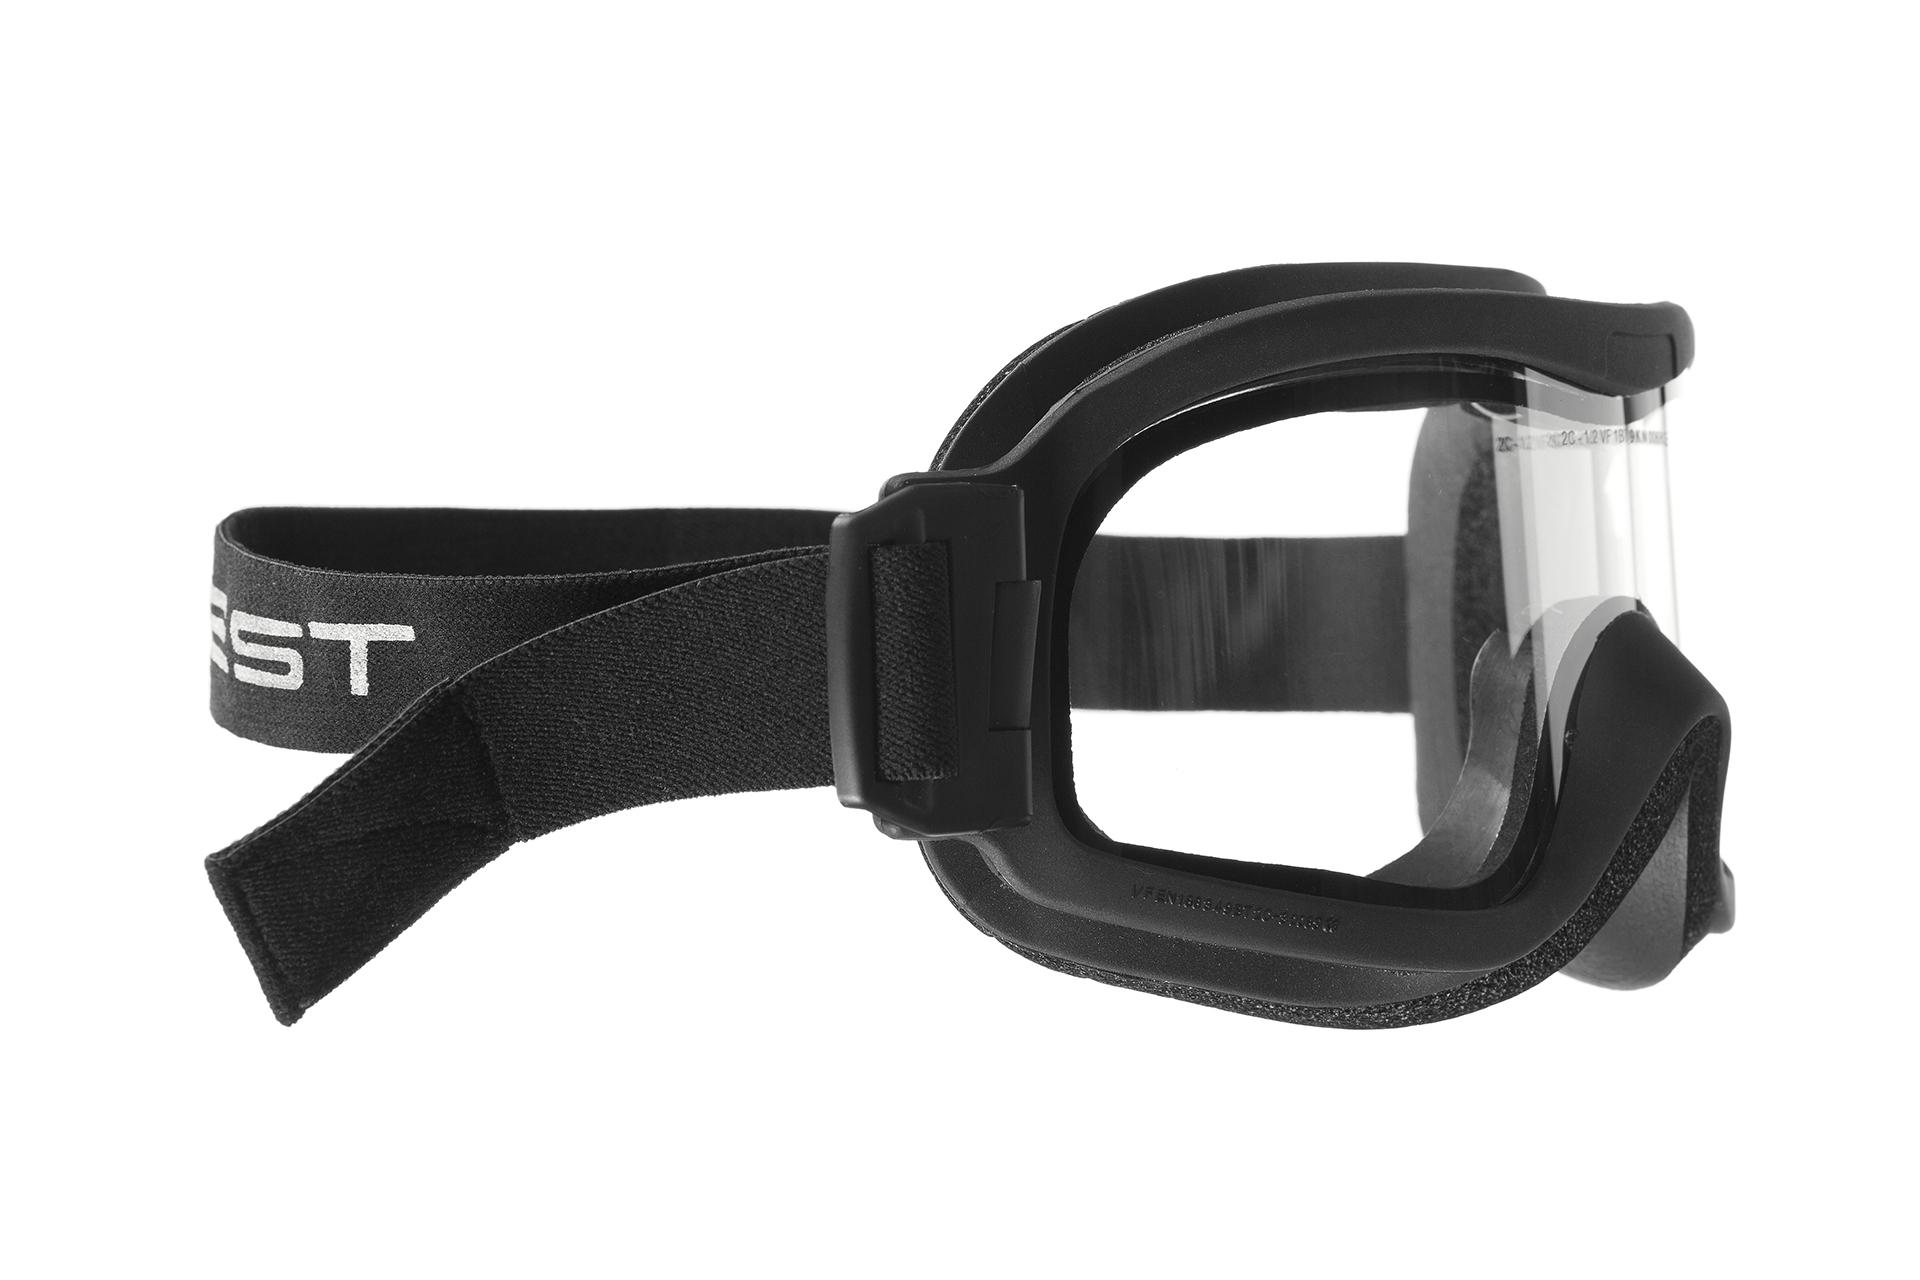 Firefighter Goggles vft1 with ventilation 4